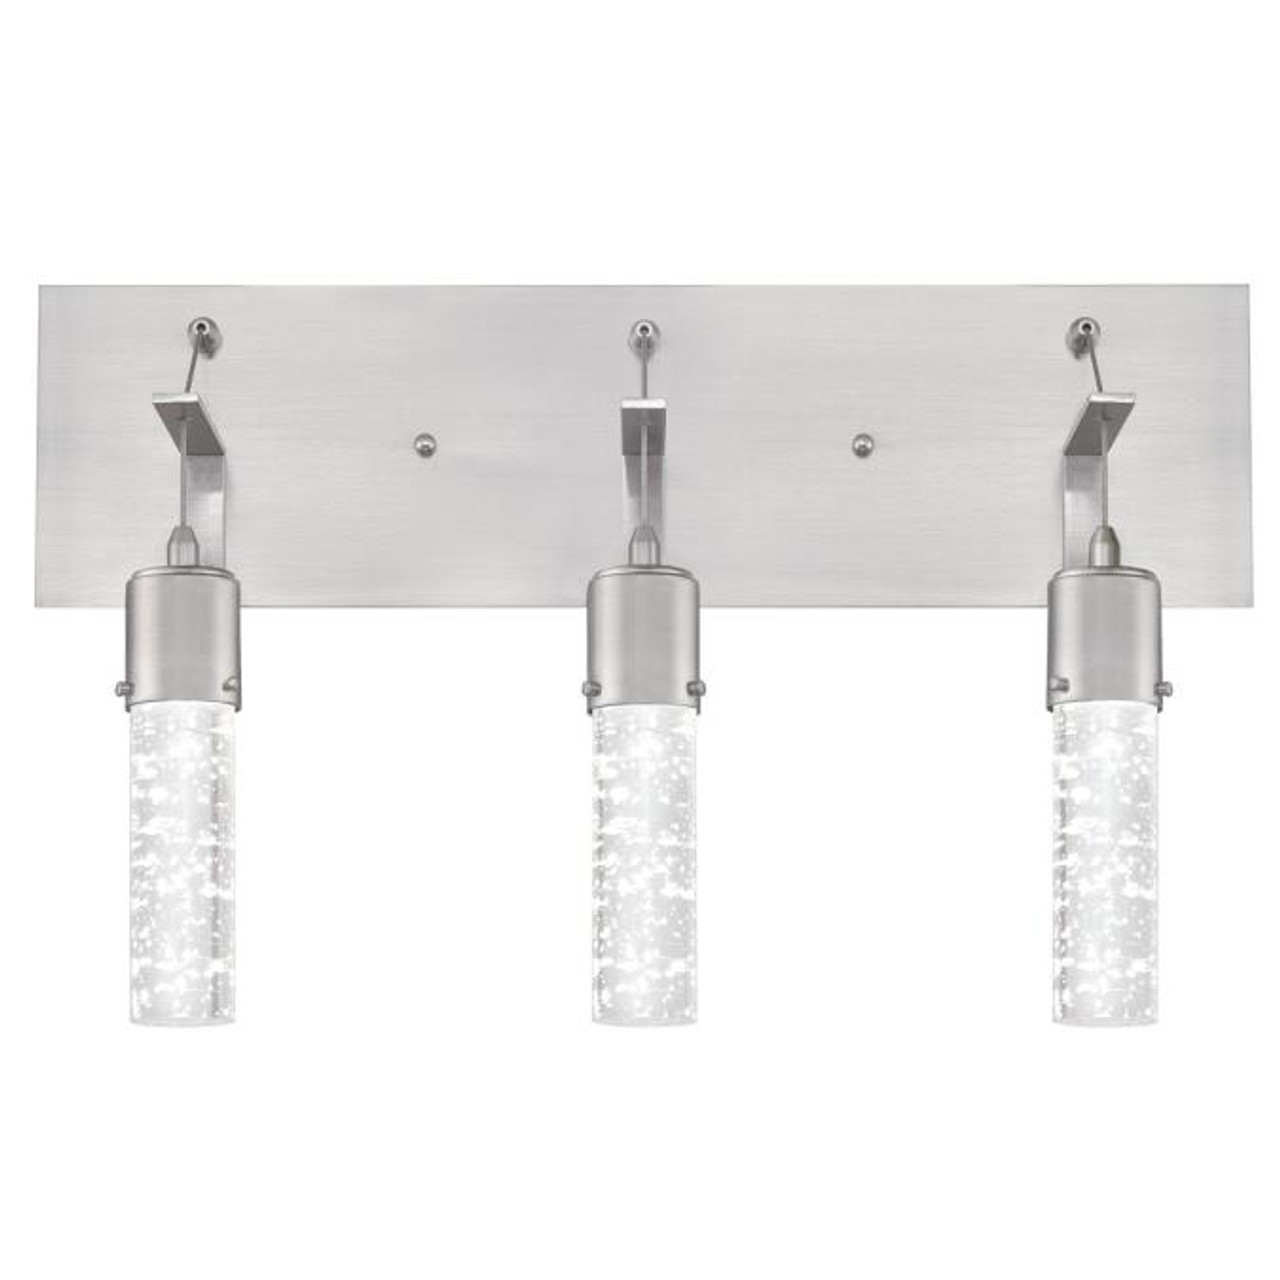 Westinghouse 6372100 Cava Three-Light, 22-Watt LED Indoor Wall Fixture, Brushed  Nickel Finish with Bubble